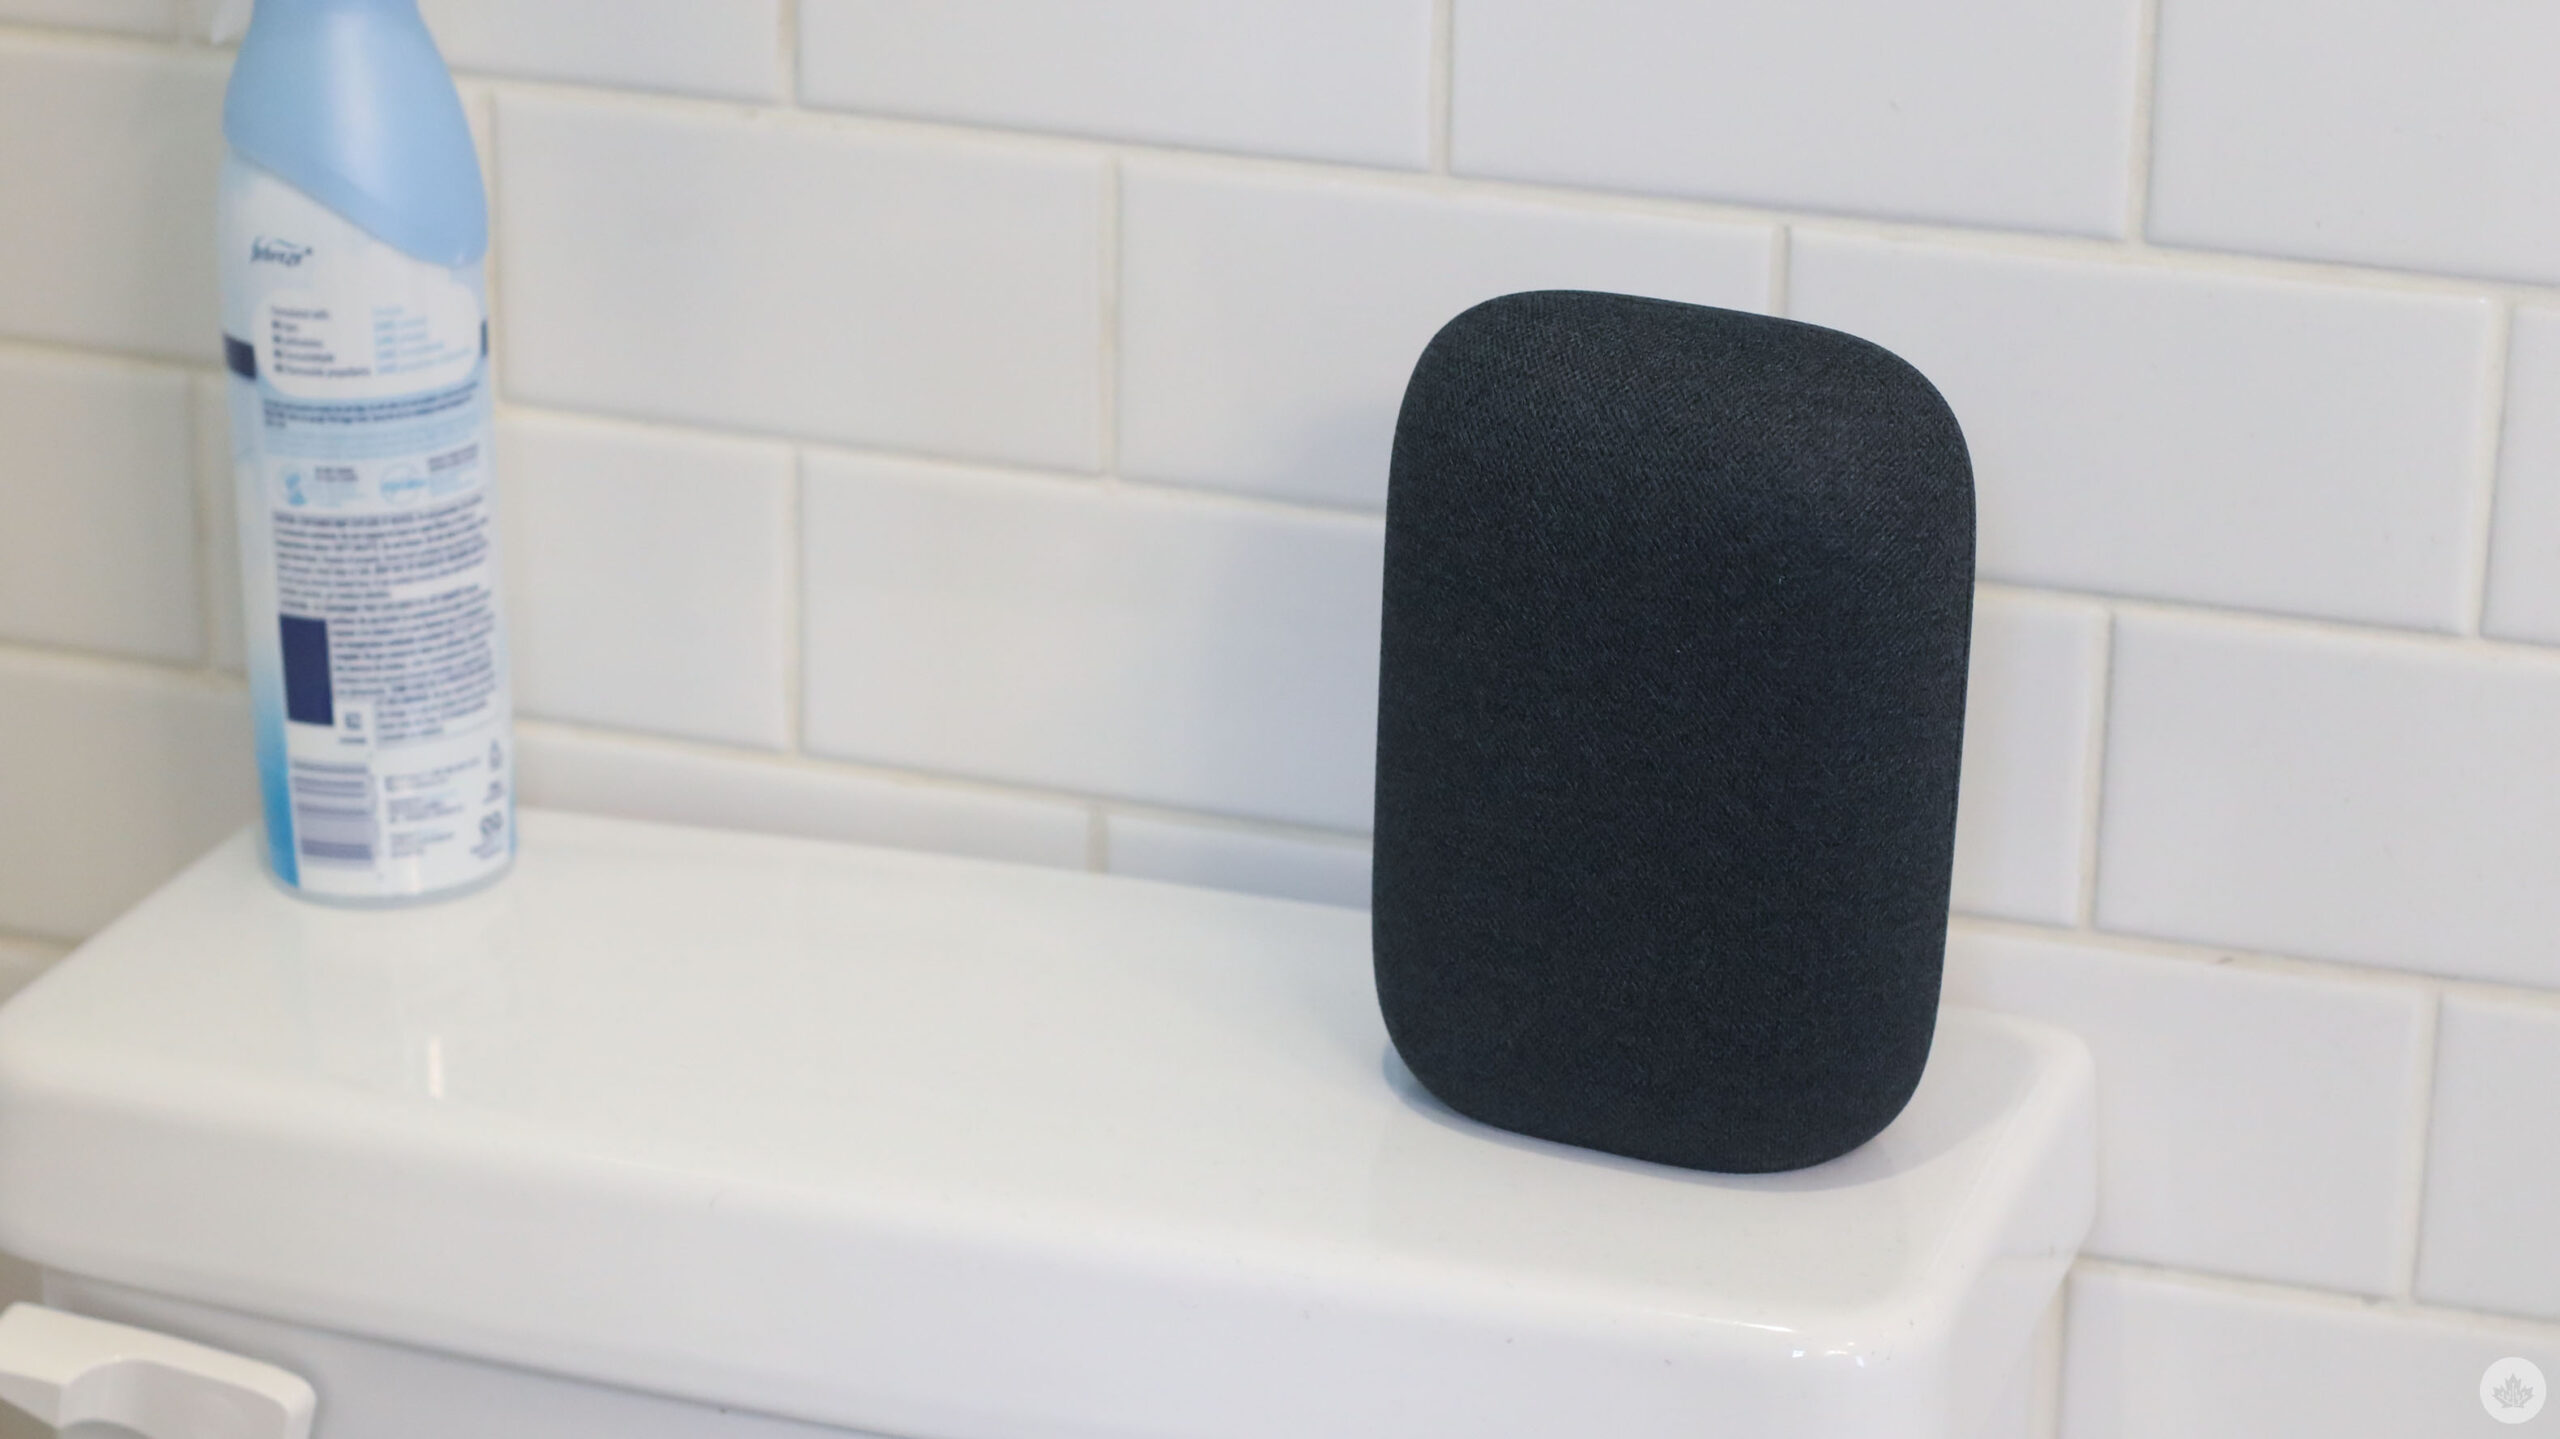 Am I weird for wanting to put a smart speaker in my bathroom? thumbnail